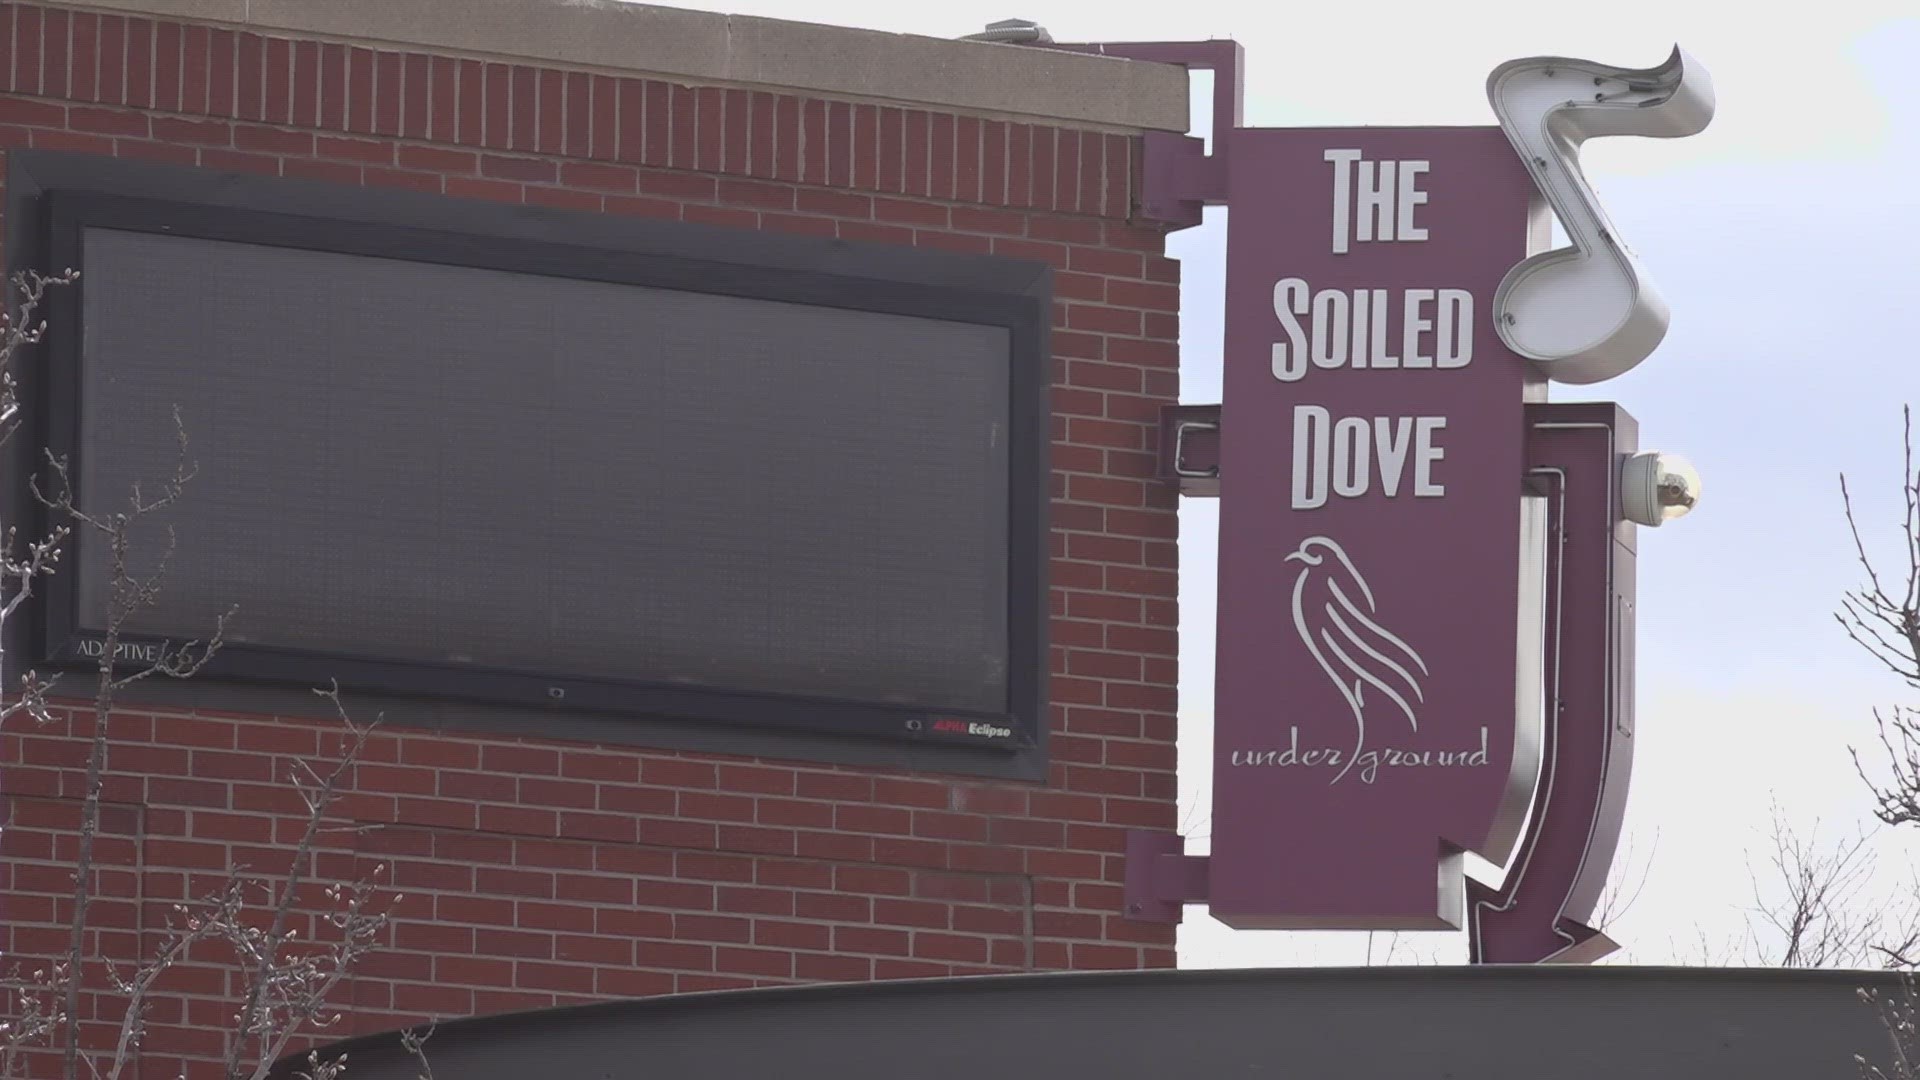 The owner of The Soiled Dove Underground said a restructuring of the music venue has resulted in significant changes to its lineup of shows.